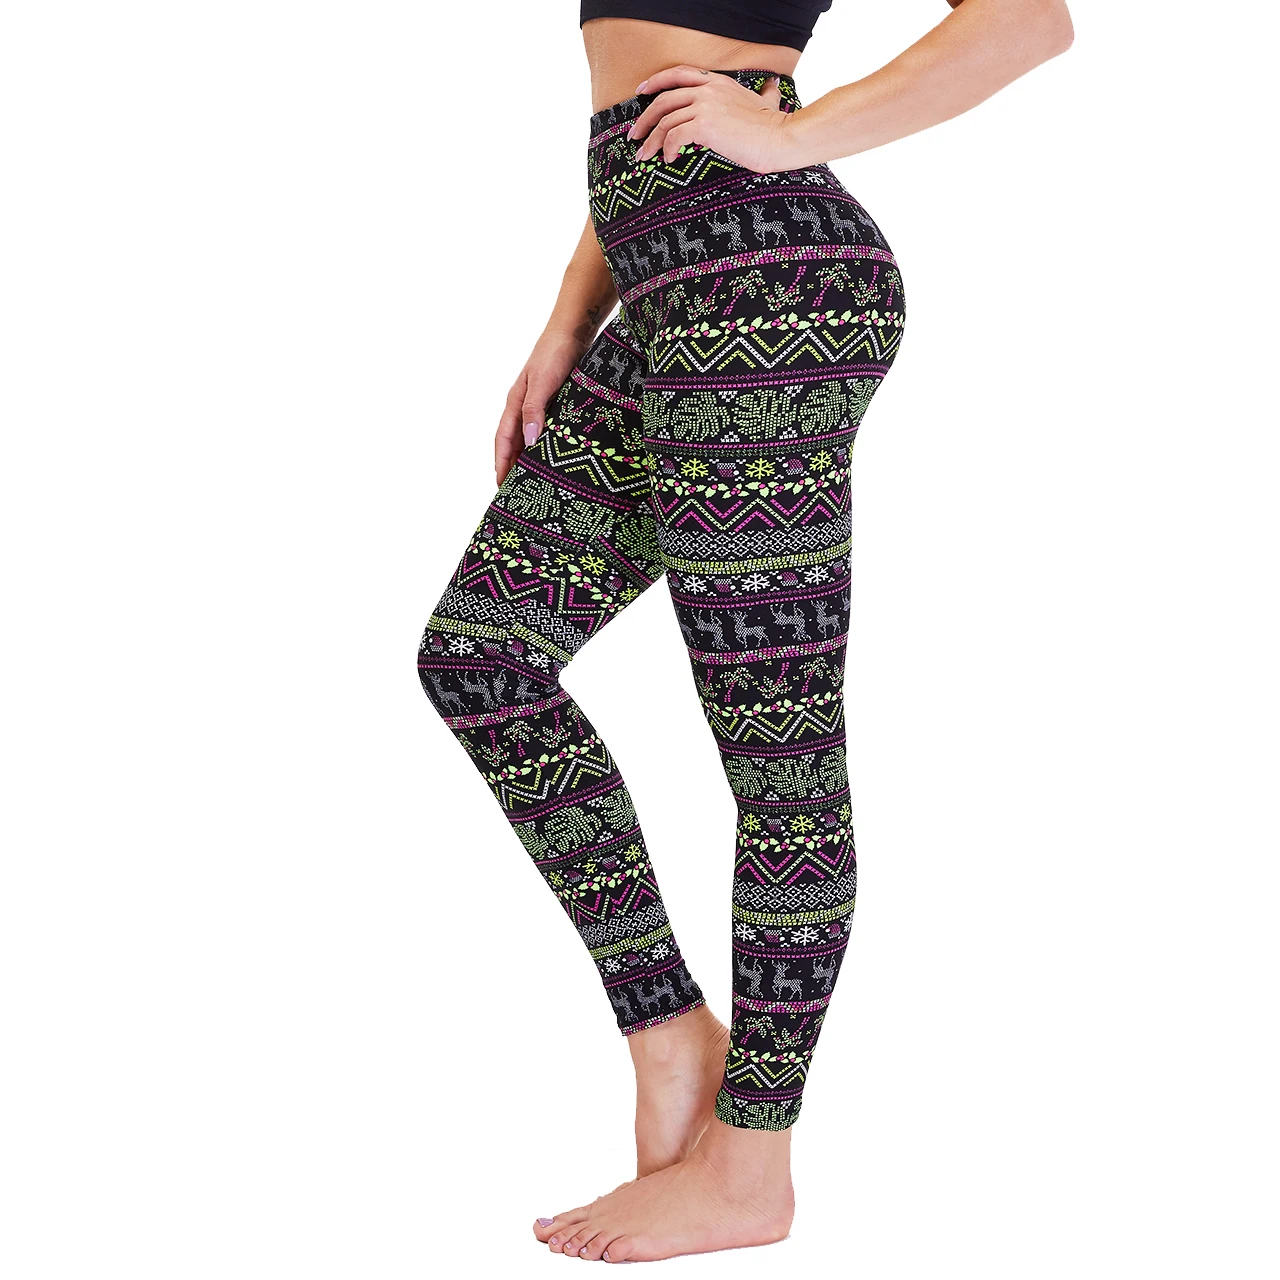 Wholesale High Waist Printed Yoga Leggings Pants Brushed Buttery Soft Holiday Christmas Leggings for Women